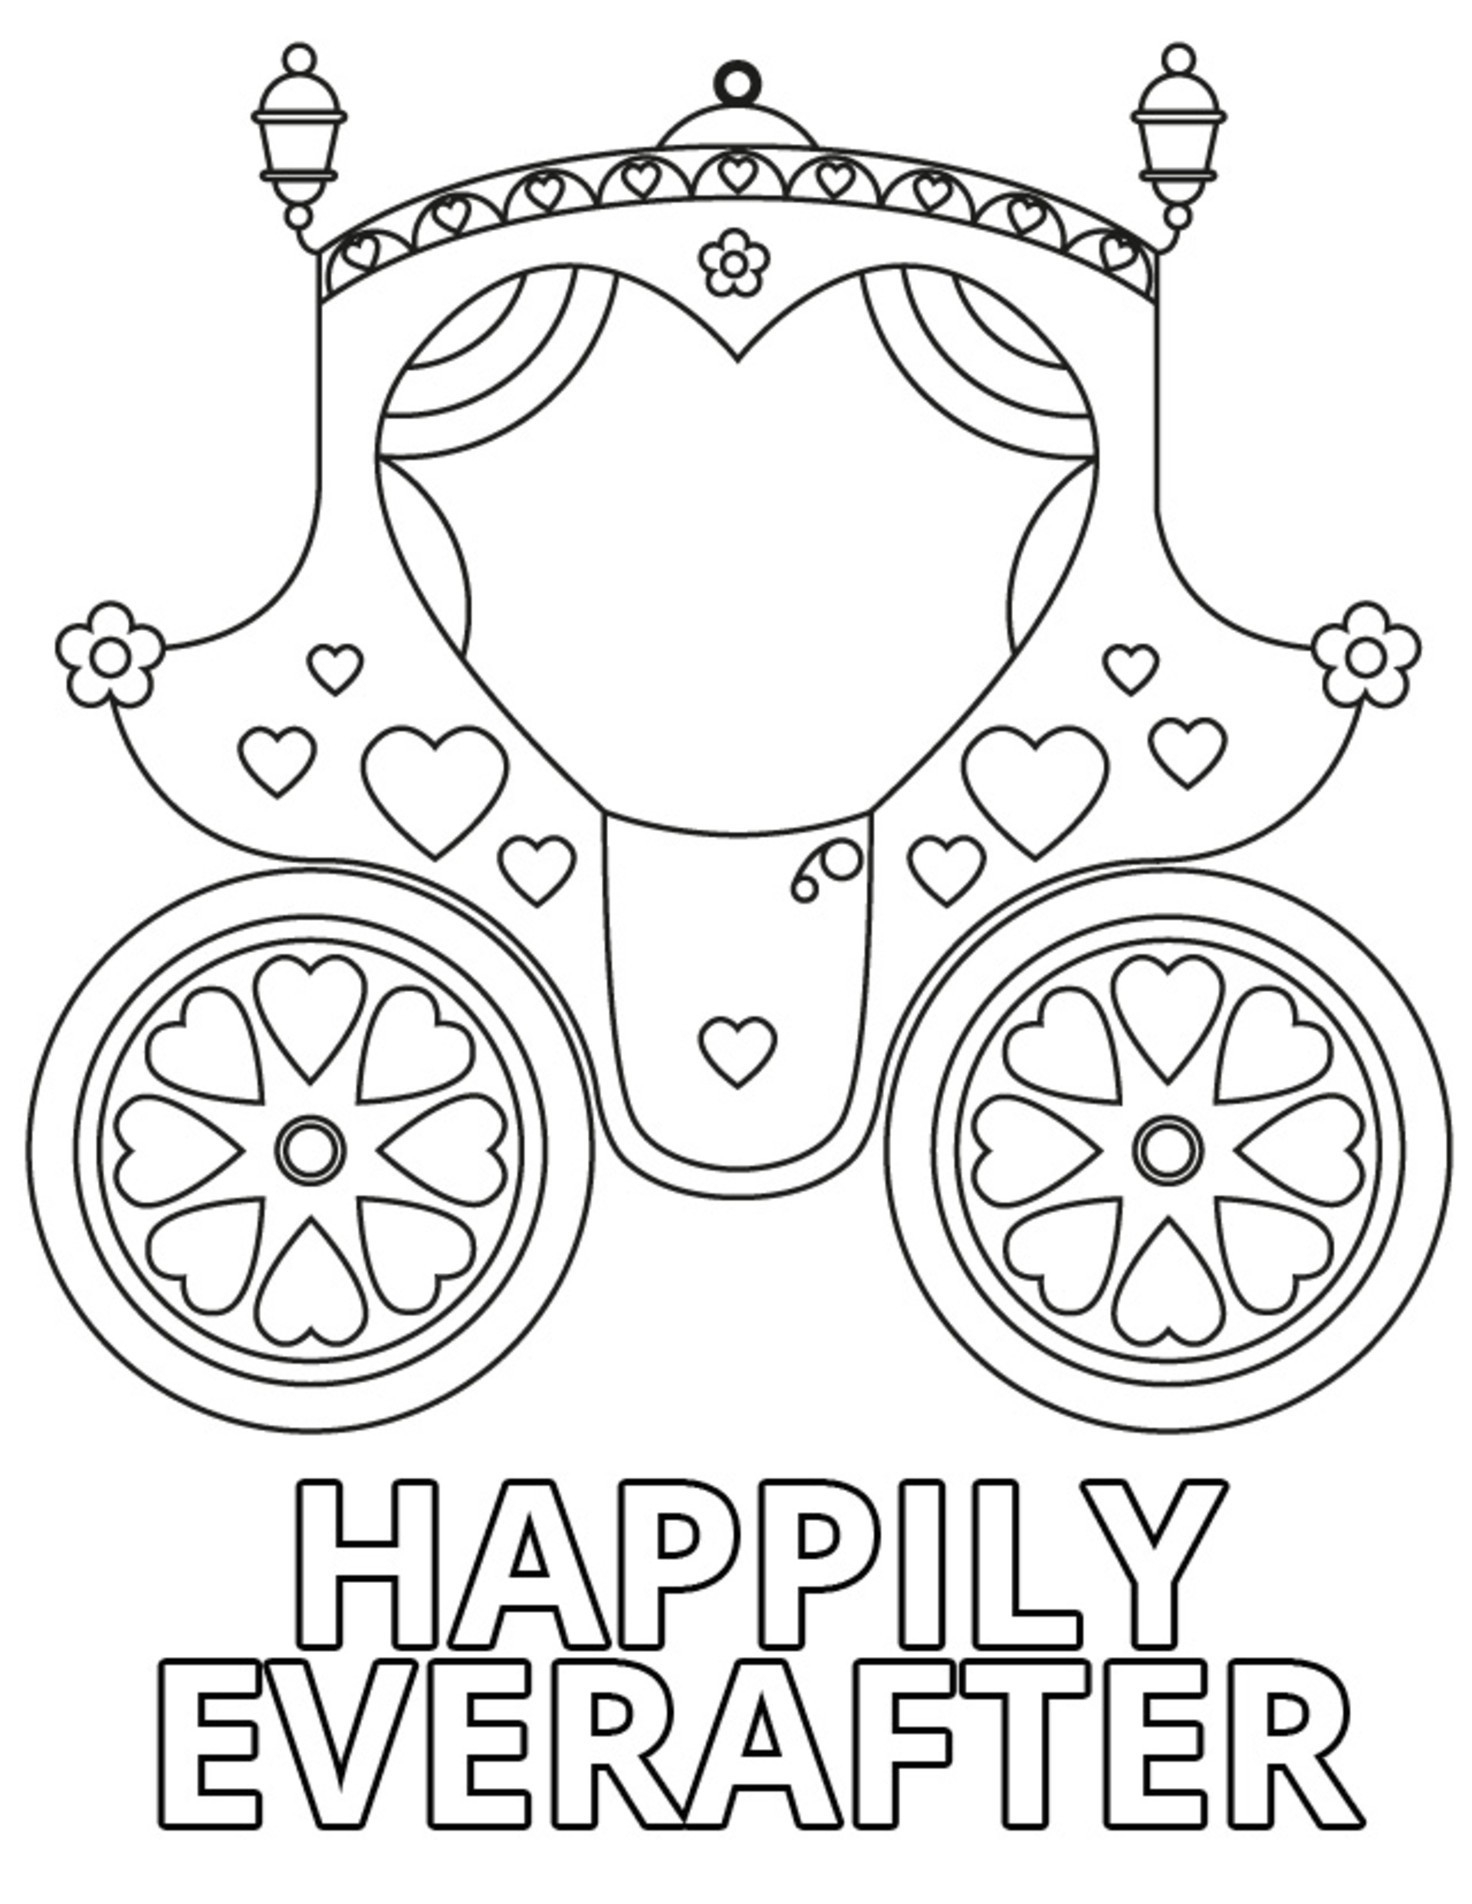 Wedding Activity Coloring Pages Kids Coloring Pages For Weddings With Coloring Pages Wedding